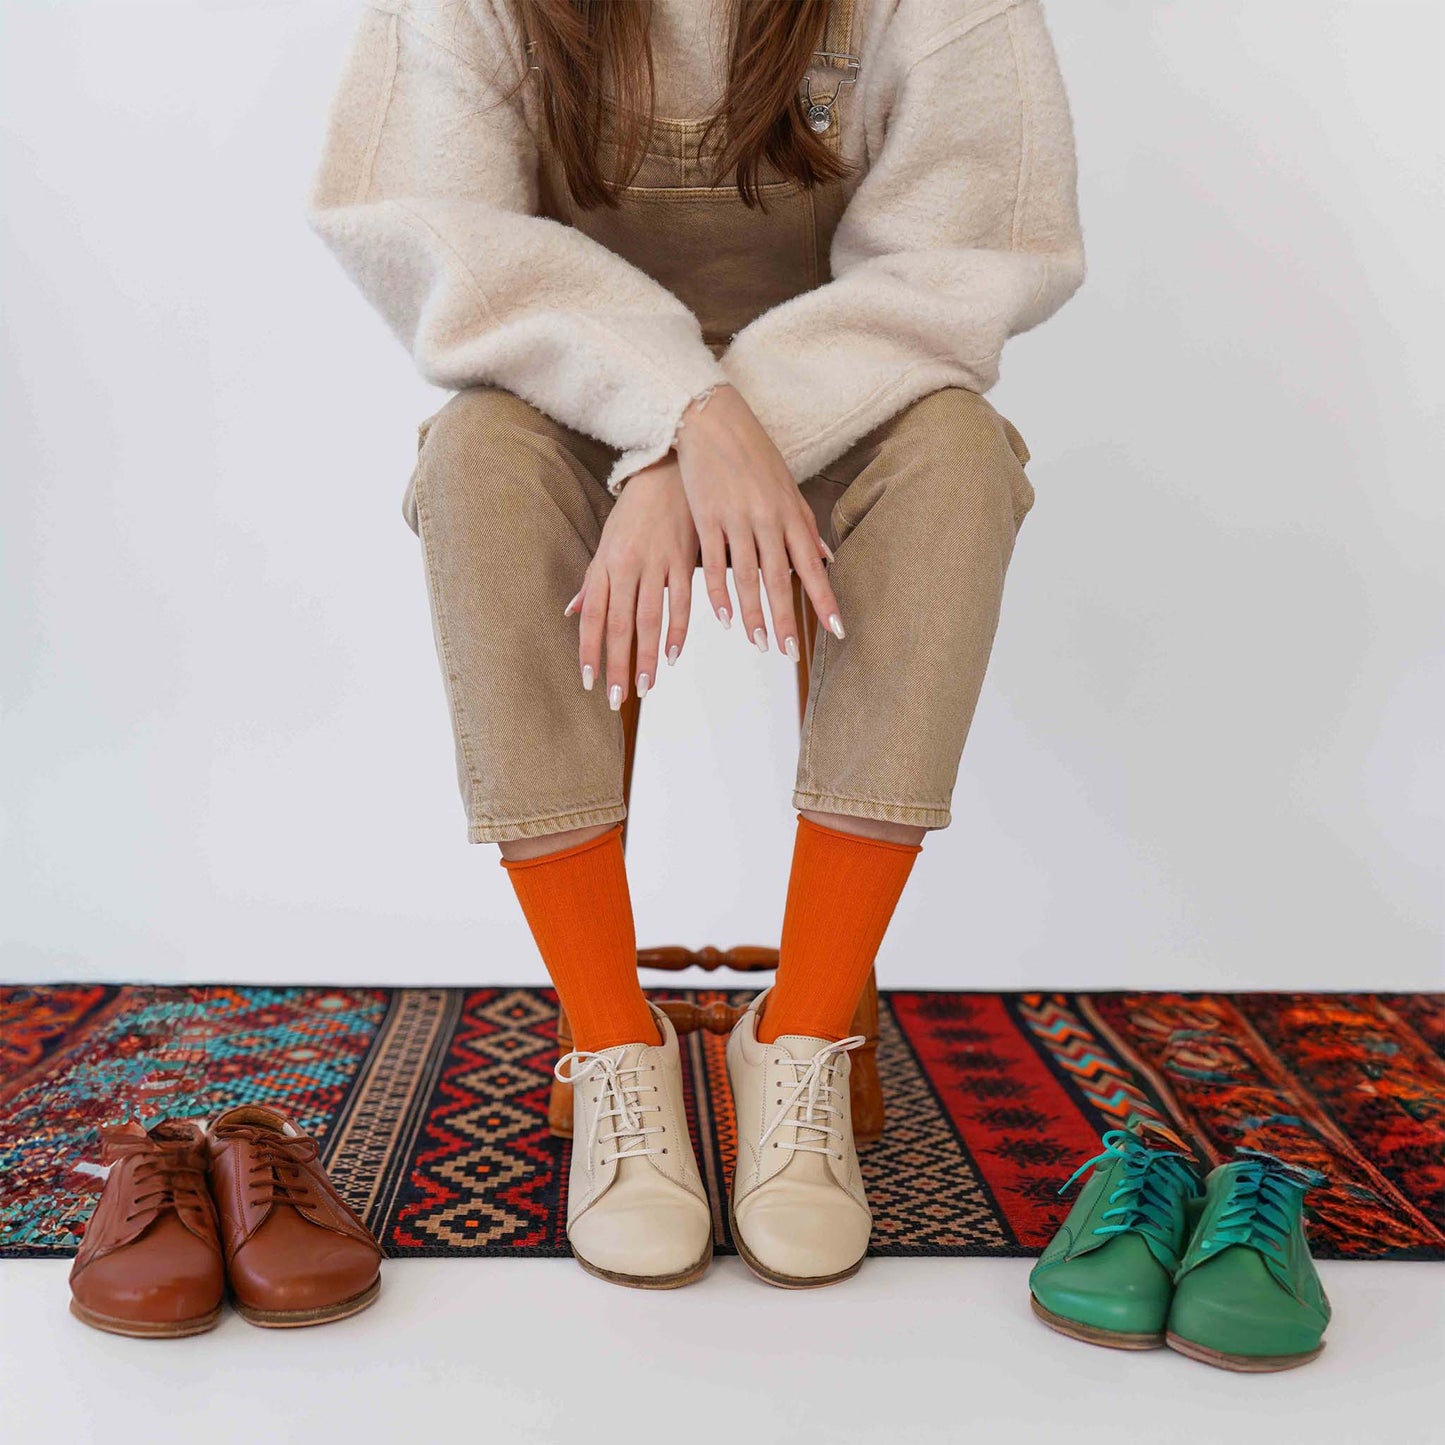 Model sitting with various Lydia leather barefoot women's sneakers in different colors, including green, beige, and brown, on a colorful patterned rug.